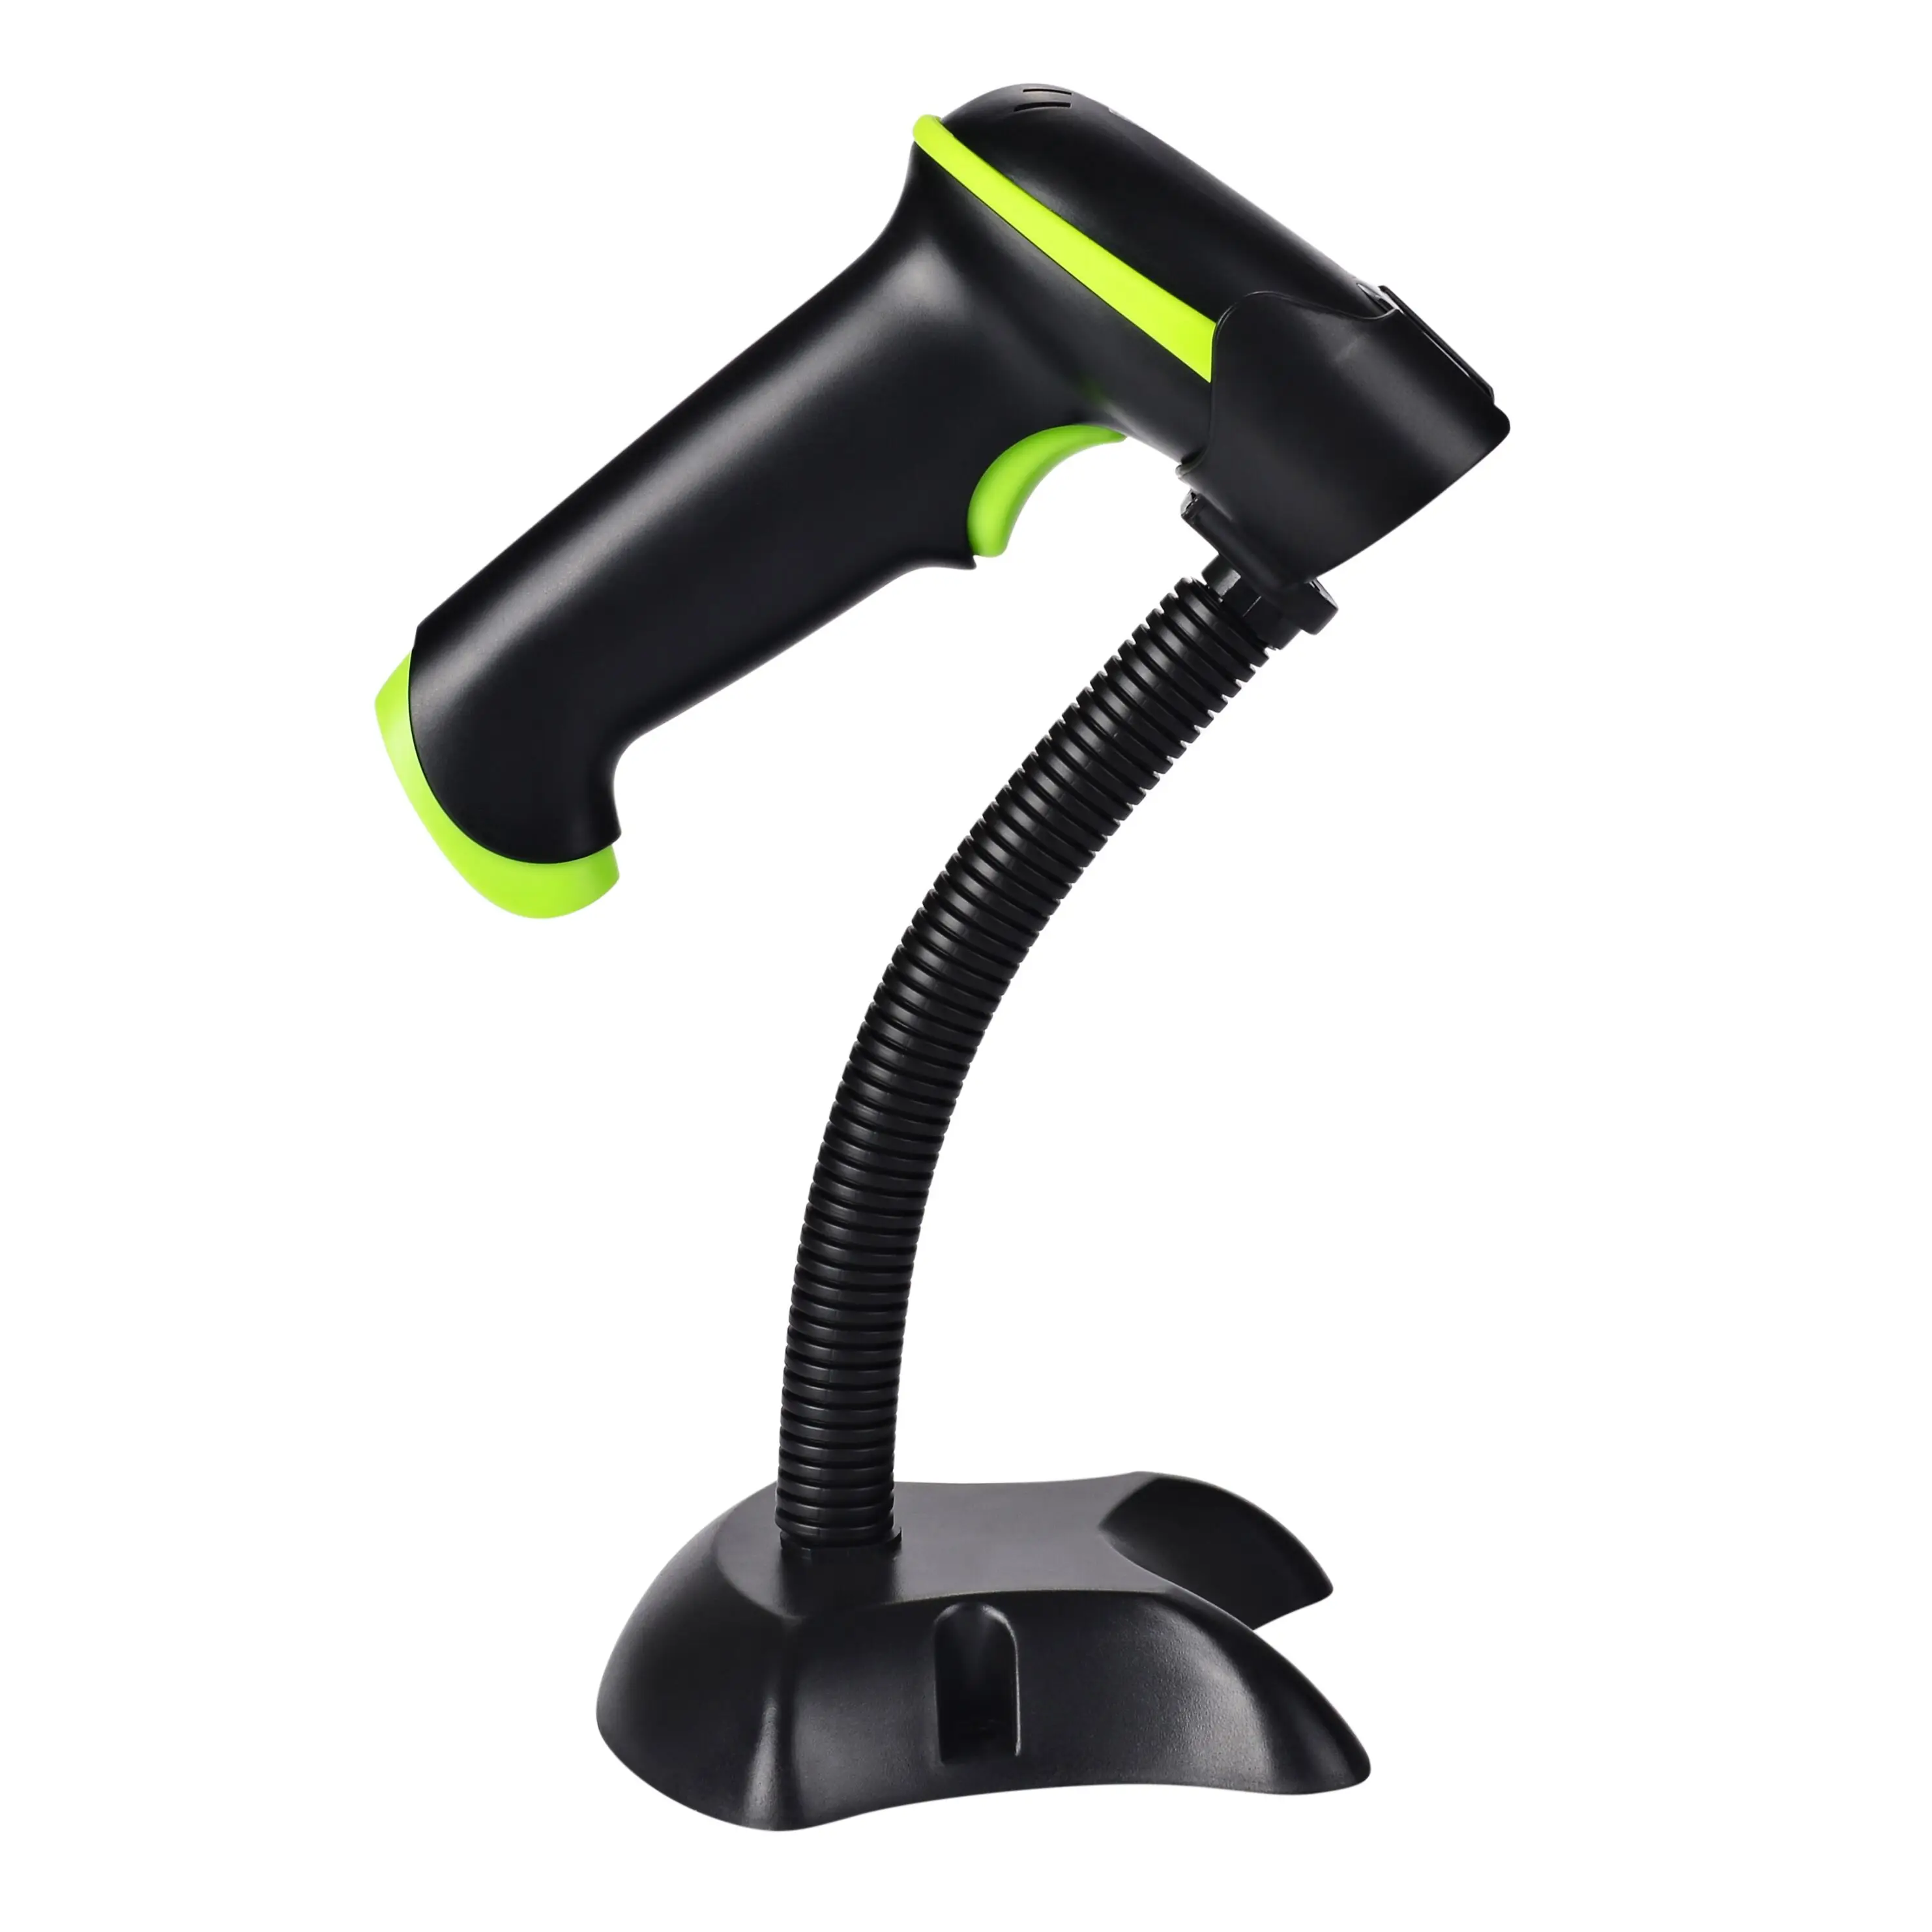 

Quality 1D Barcode Scanner Laser USB RS232 Wired Handheld For Supermarket Retail Shop With Stand Black Bar code Reader